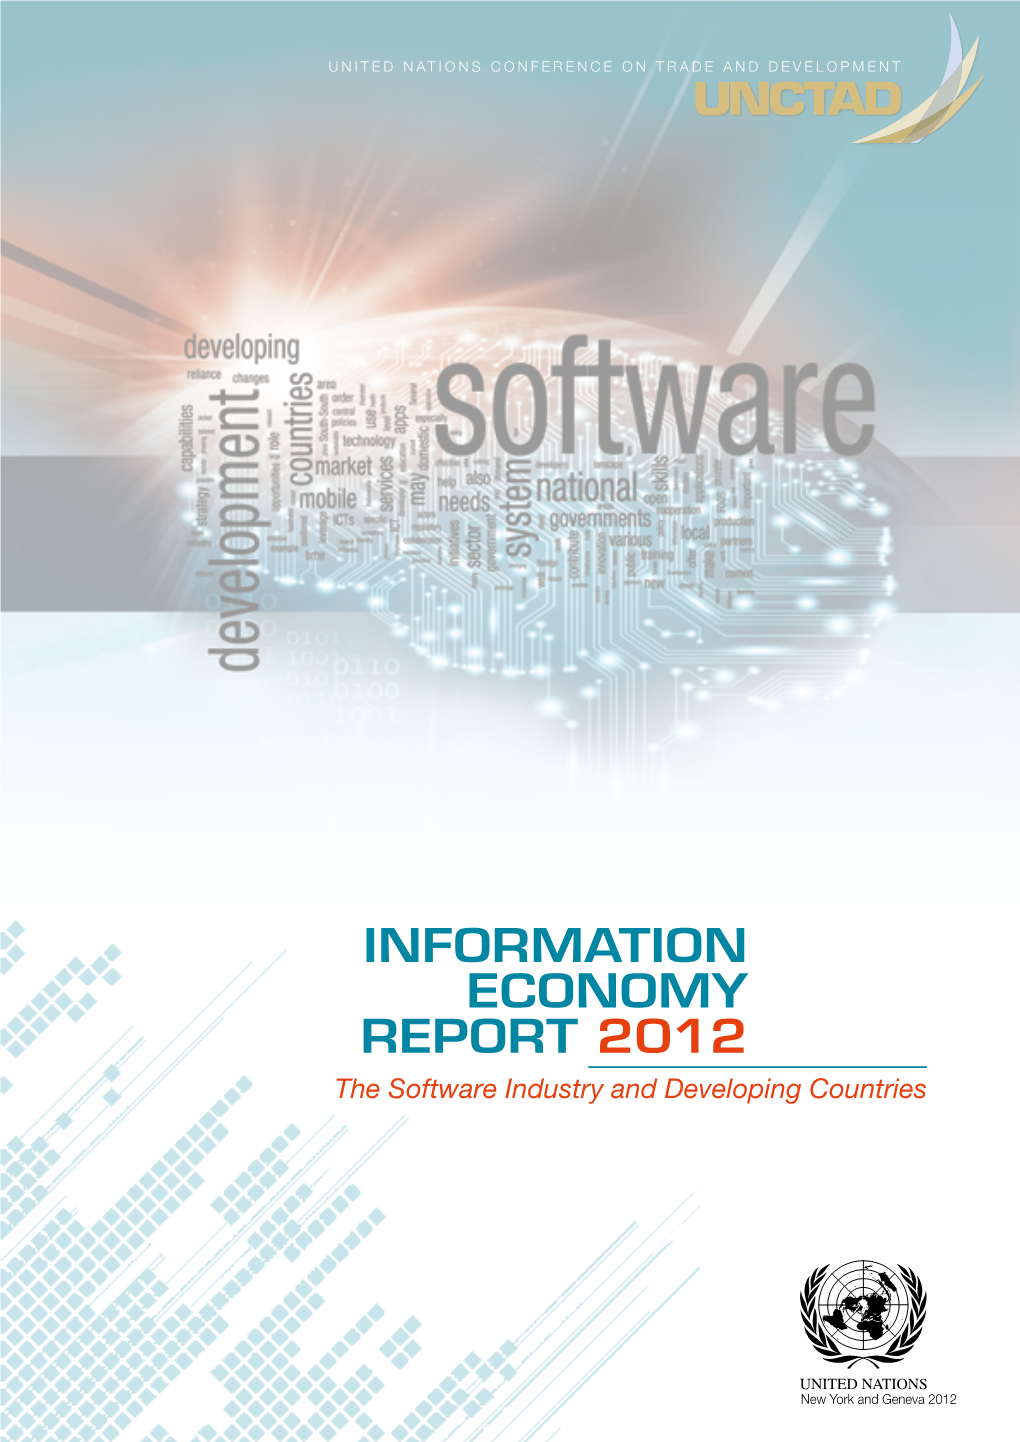 Information Economy Report 2012: the Software Industry and Developing Countries